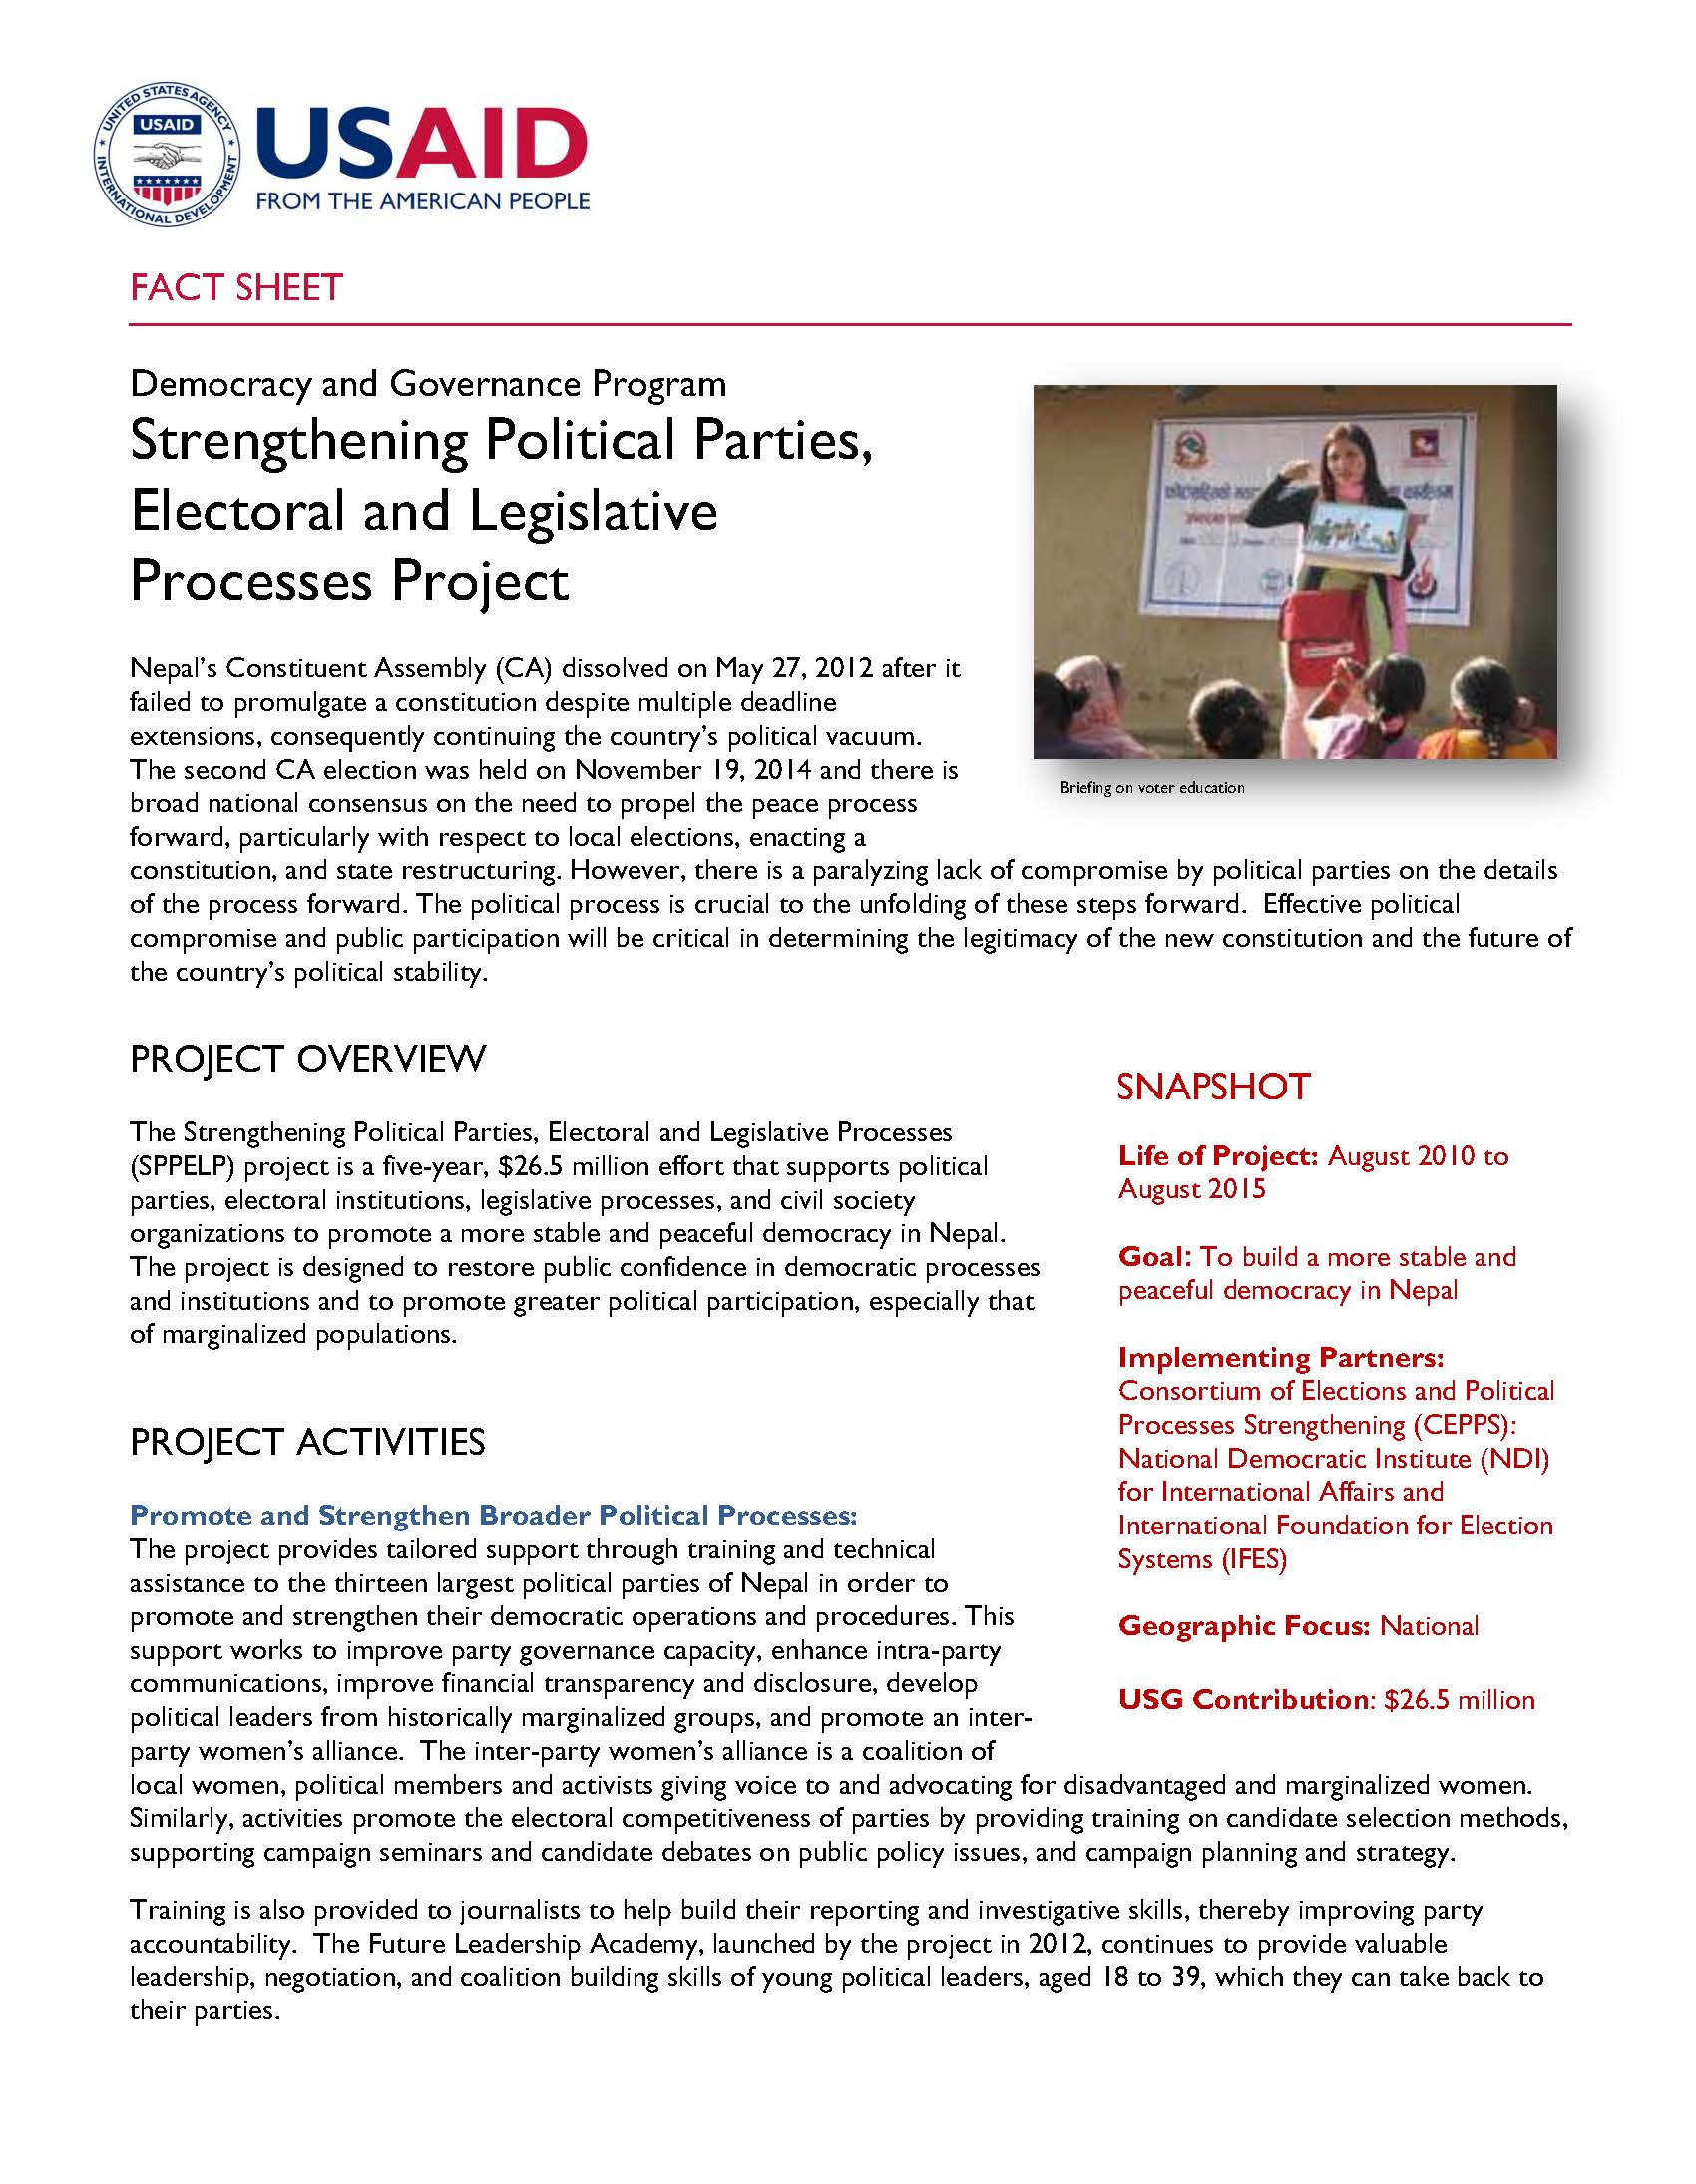 STRENGTHENING POLITICAL PARTIES, ELECTORAL AND LEGISLATIVE PROCESSES PROJECT